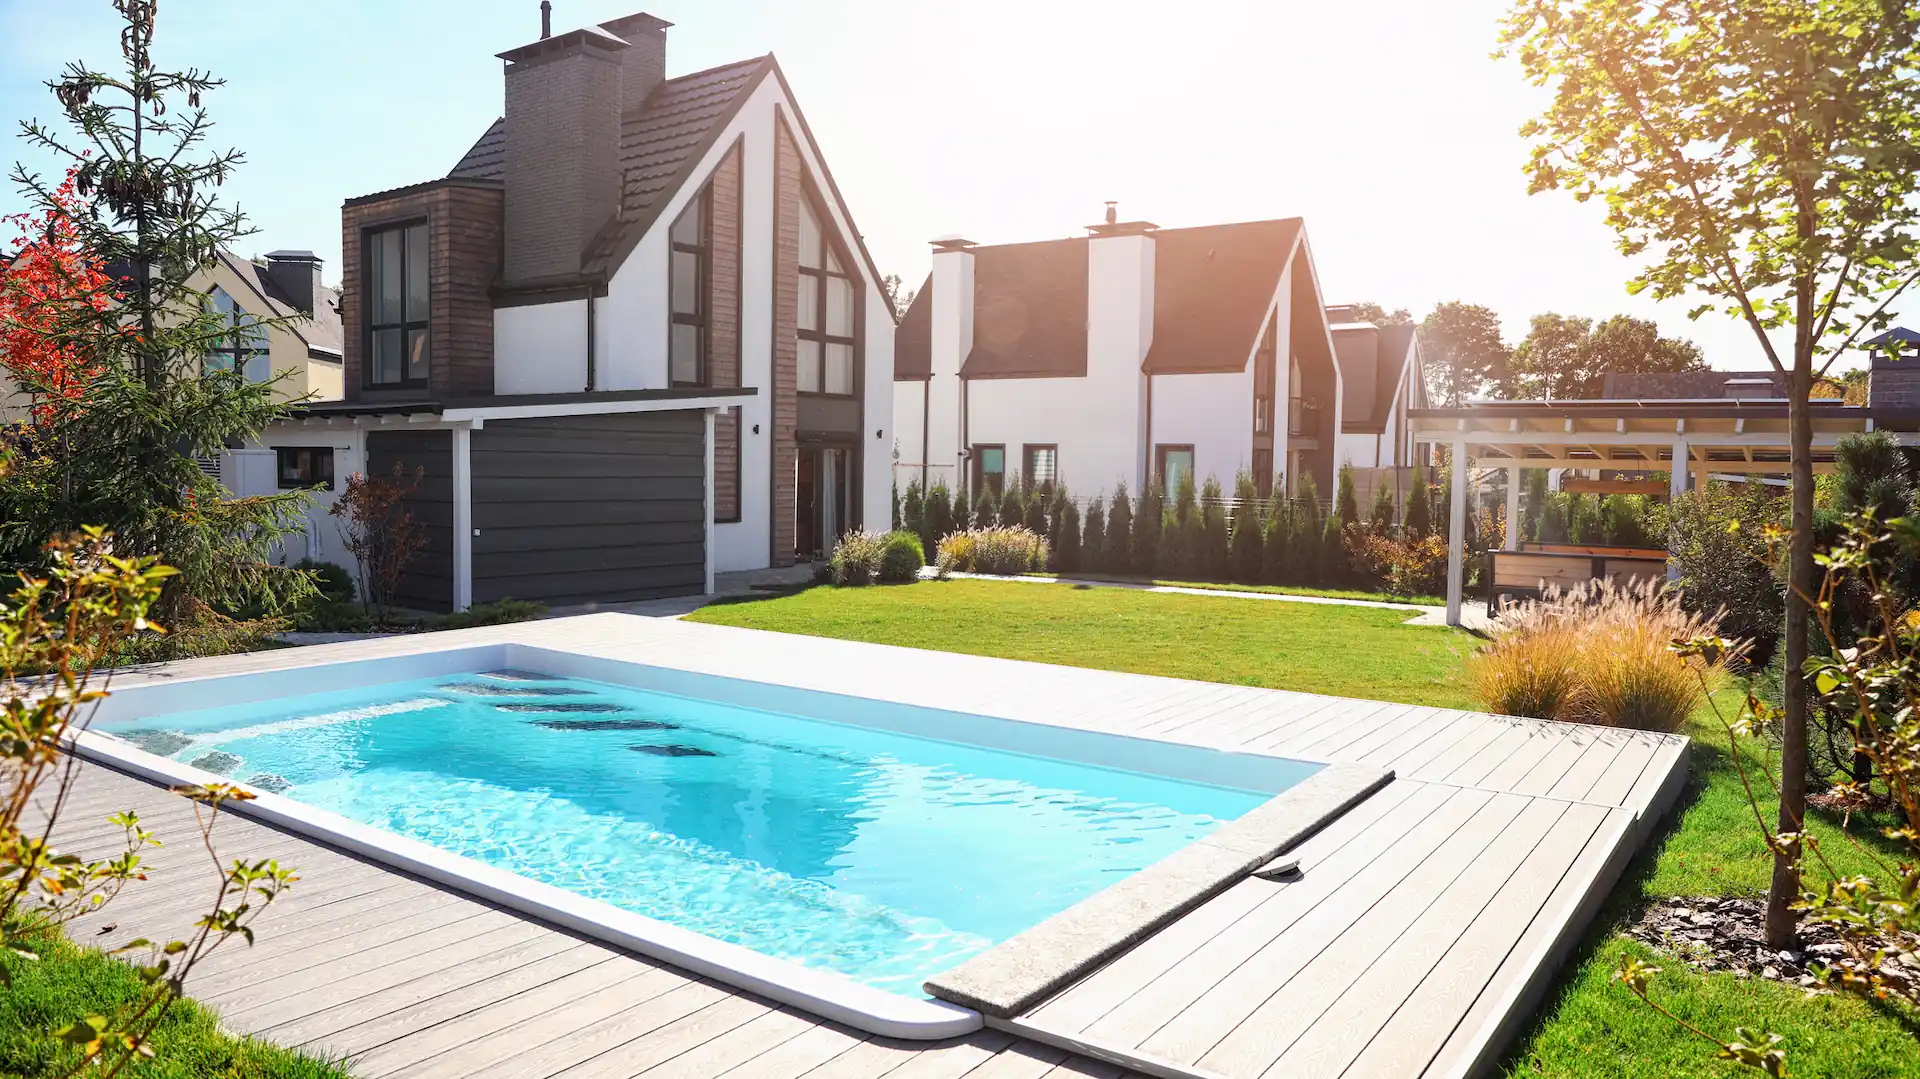 A modern house with an inground pool sitting in the sunlight. With pools such as these in the market, it's important for pool businesses to stay abreast of the latest pool equipment for their customers.